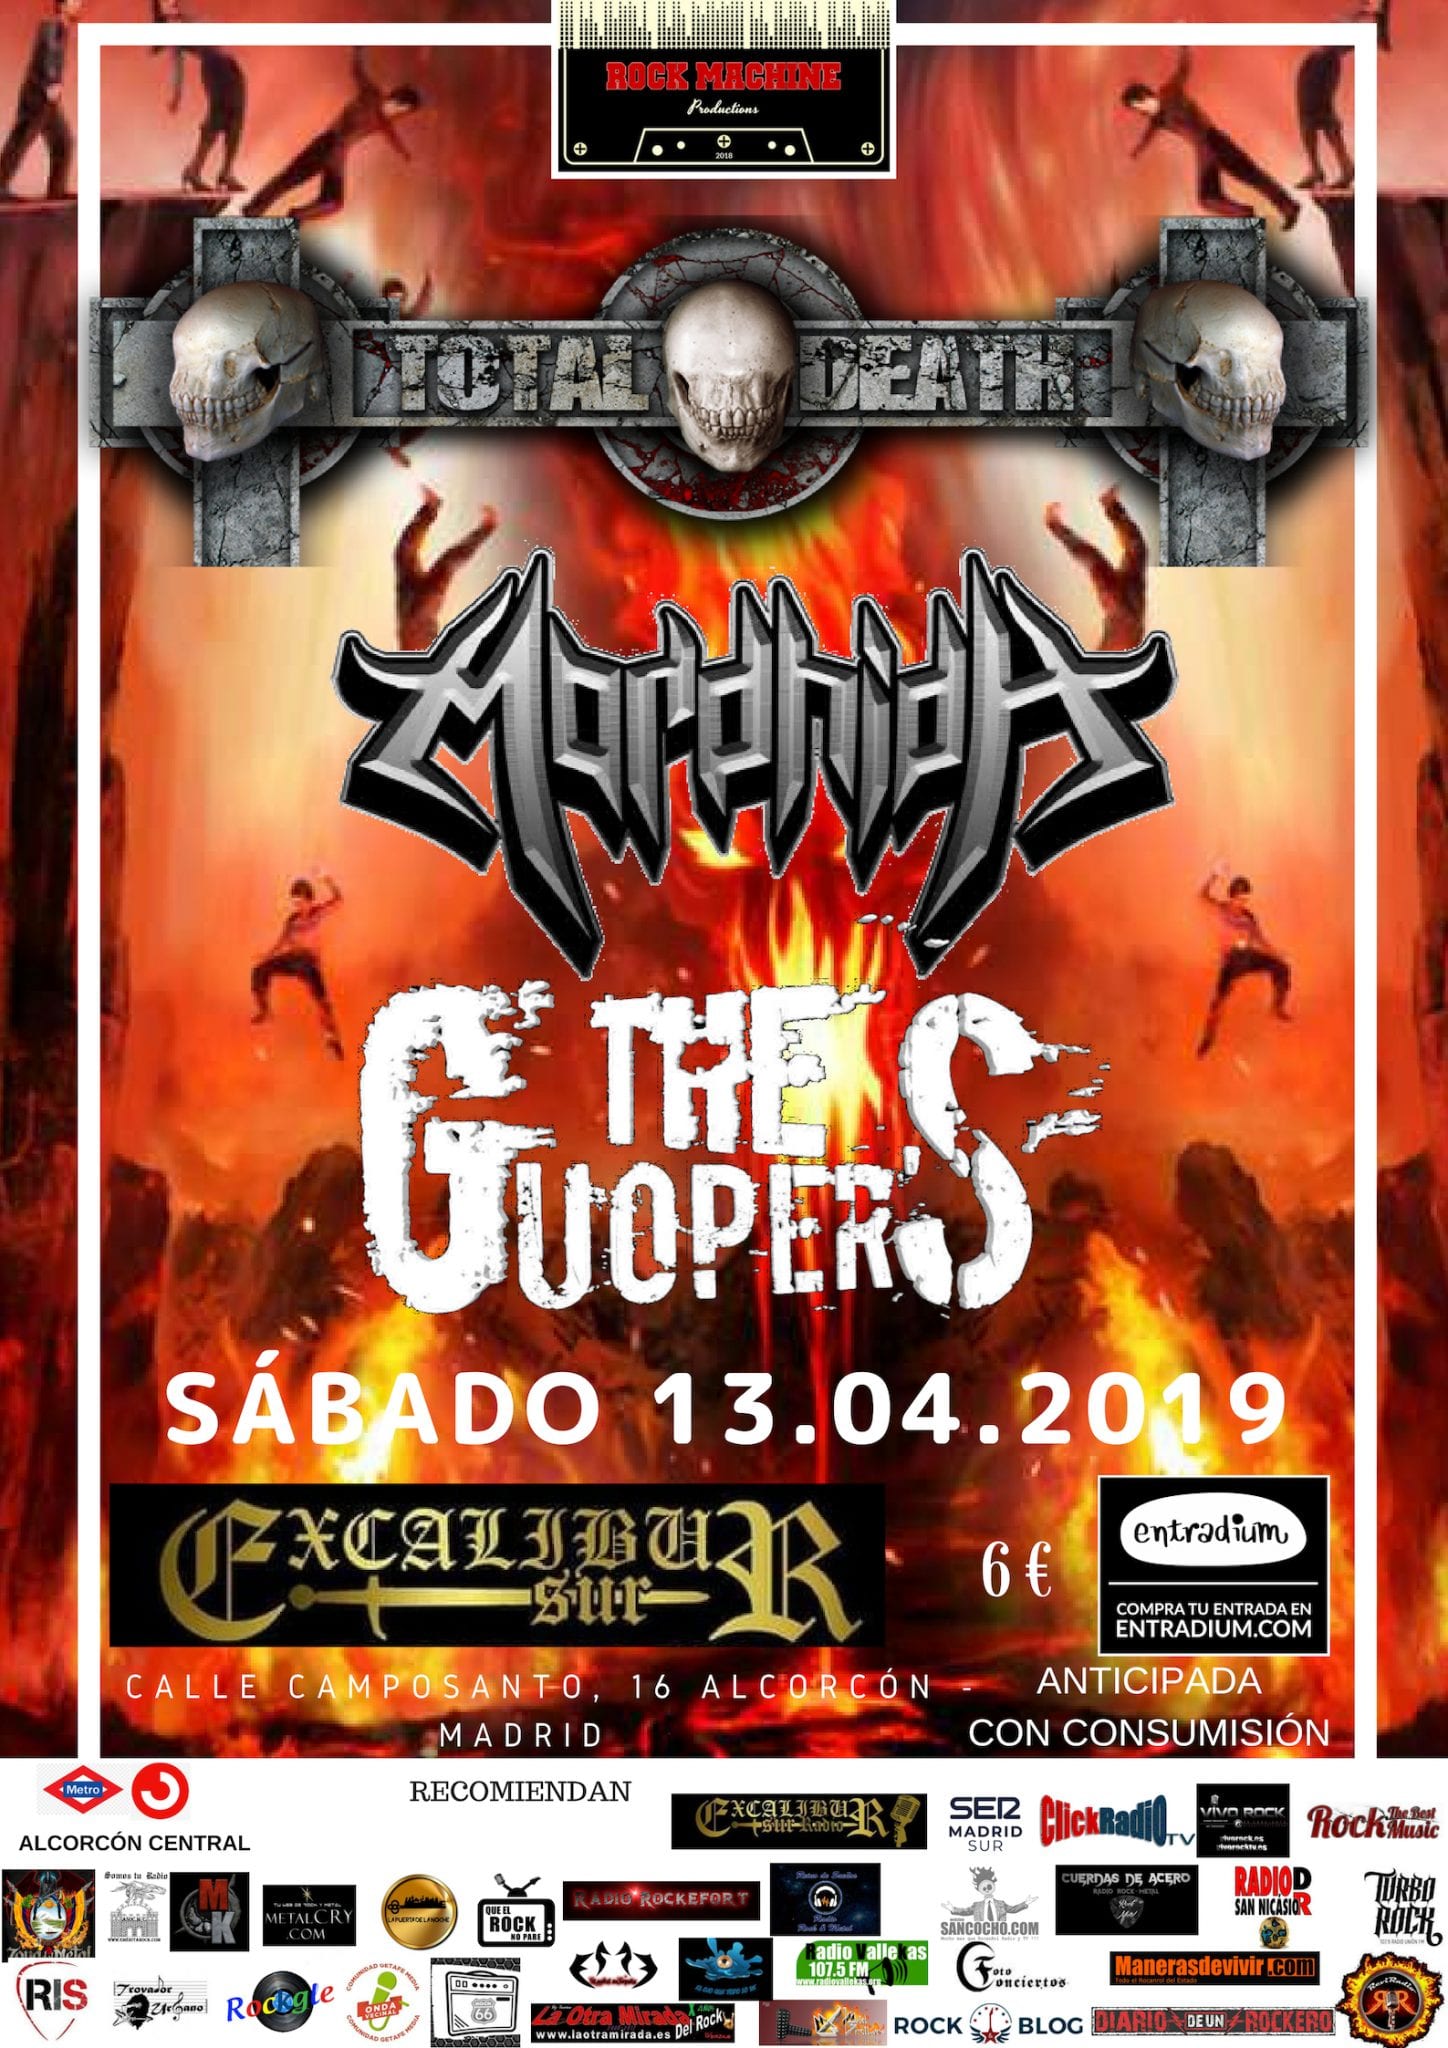 TOTAL DEATH CELEBRAN “30 YEARS ON THE ROAD” – NOCHE EXTREMA EN MADRID